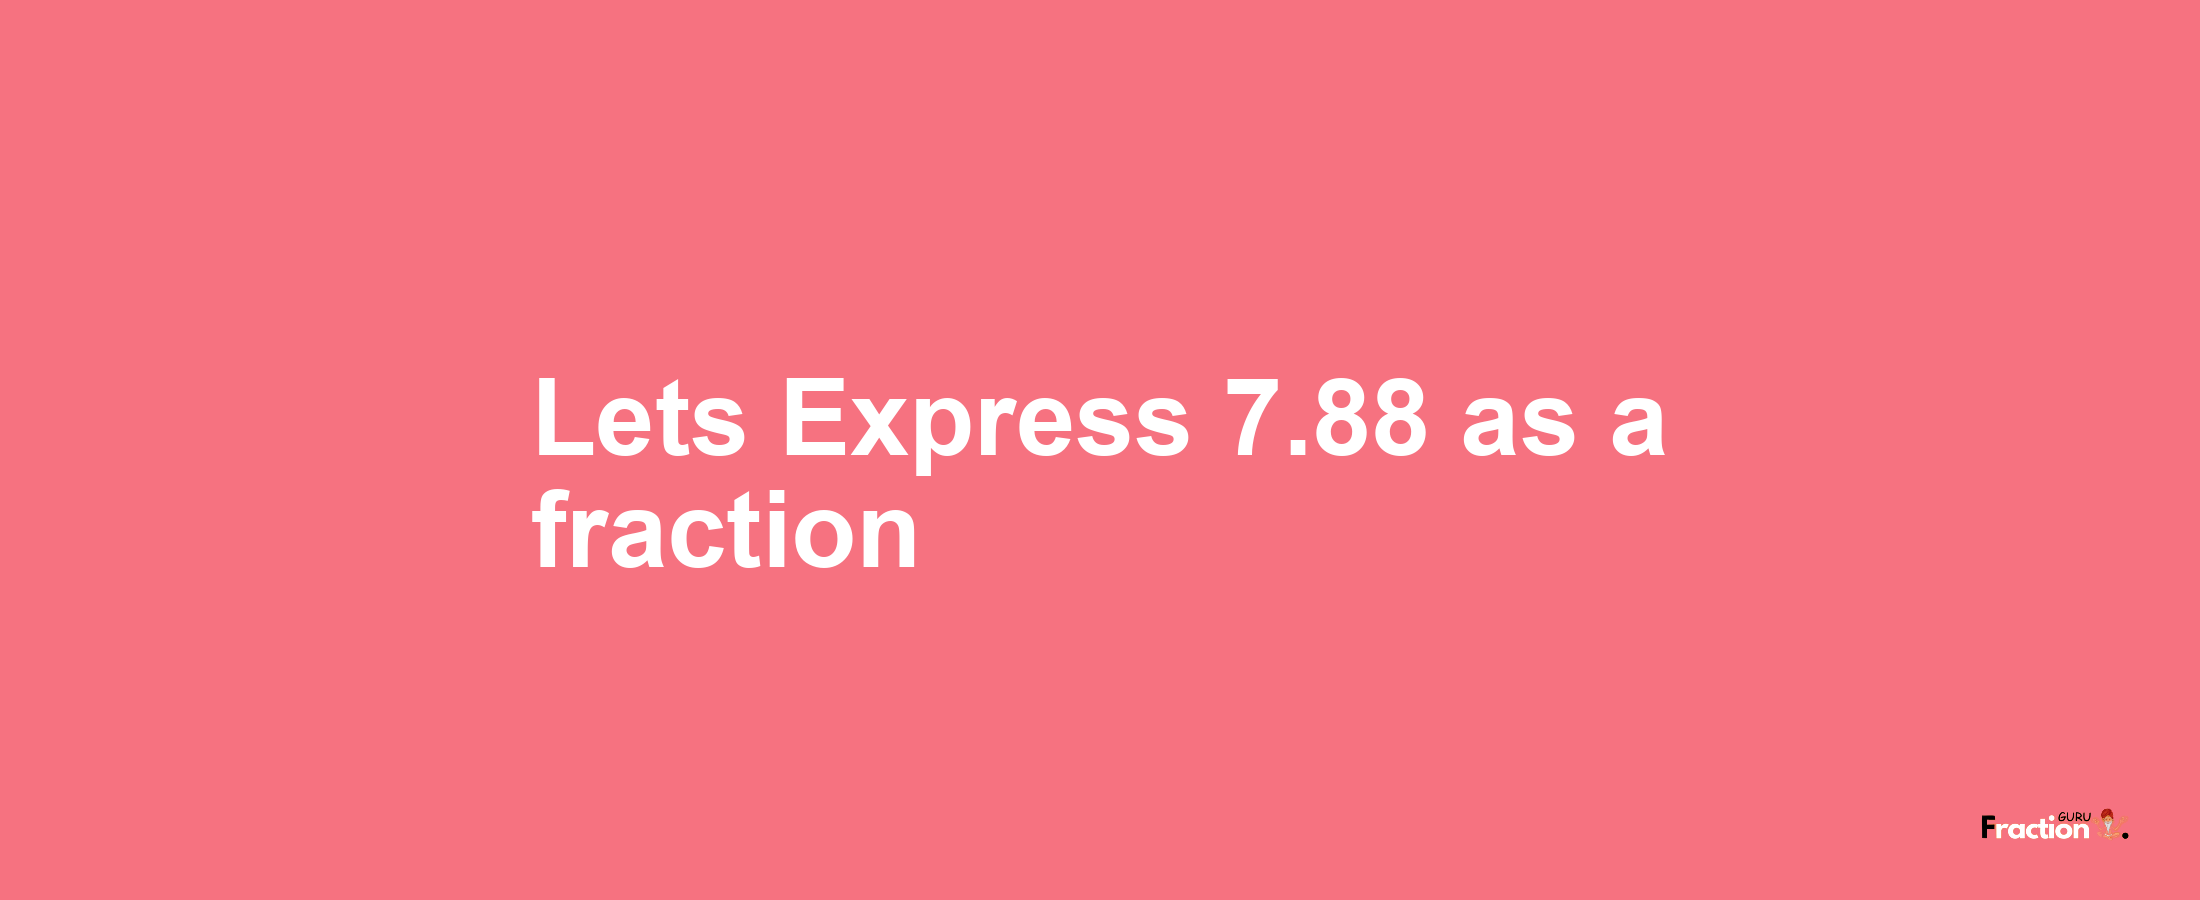 Lets Express 7.88 as afraction